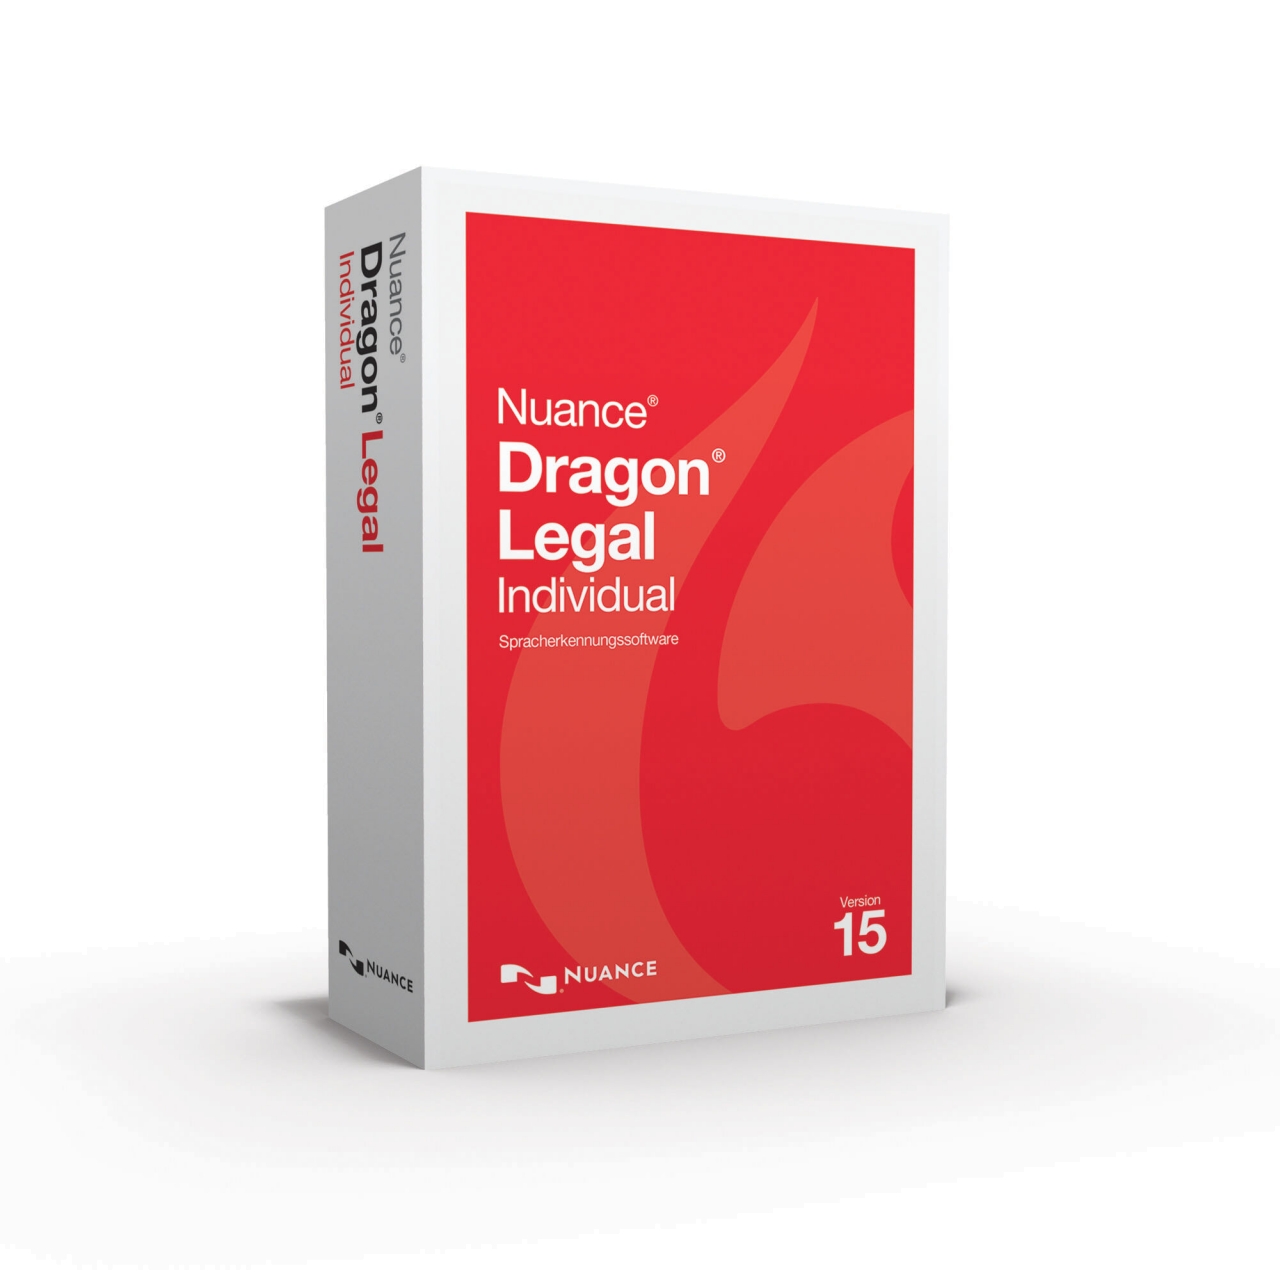 Nuance Dragon Legal Individual 15, Upgrade from Professional 12 and up